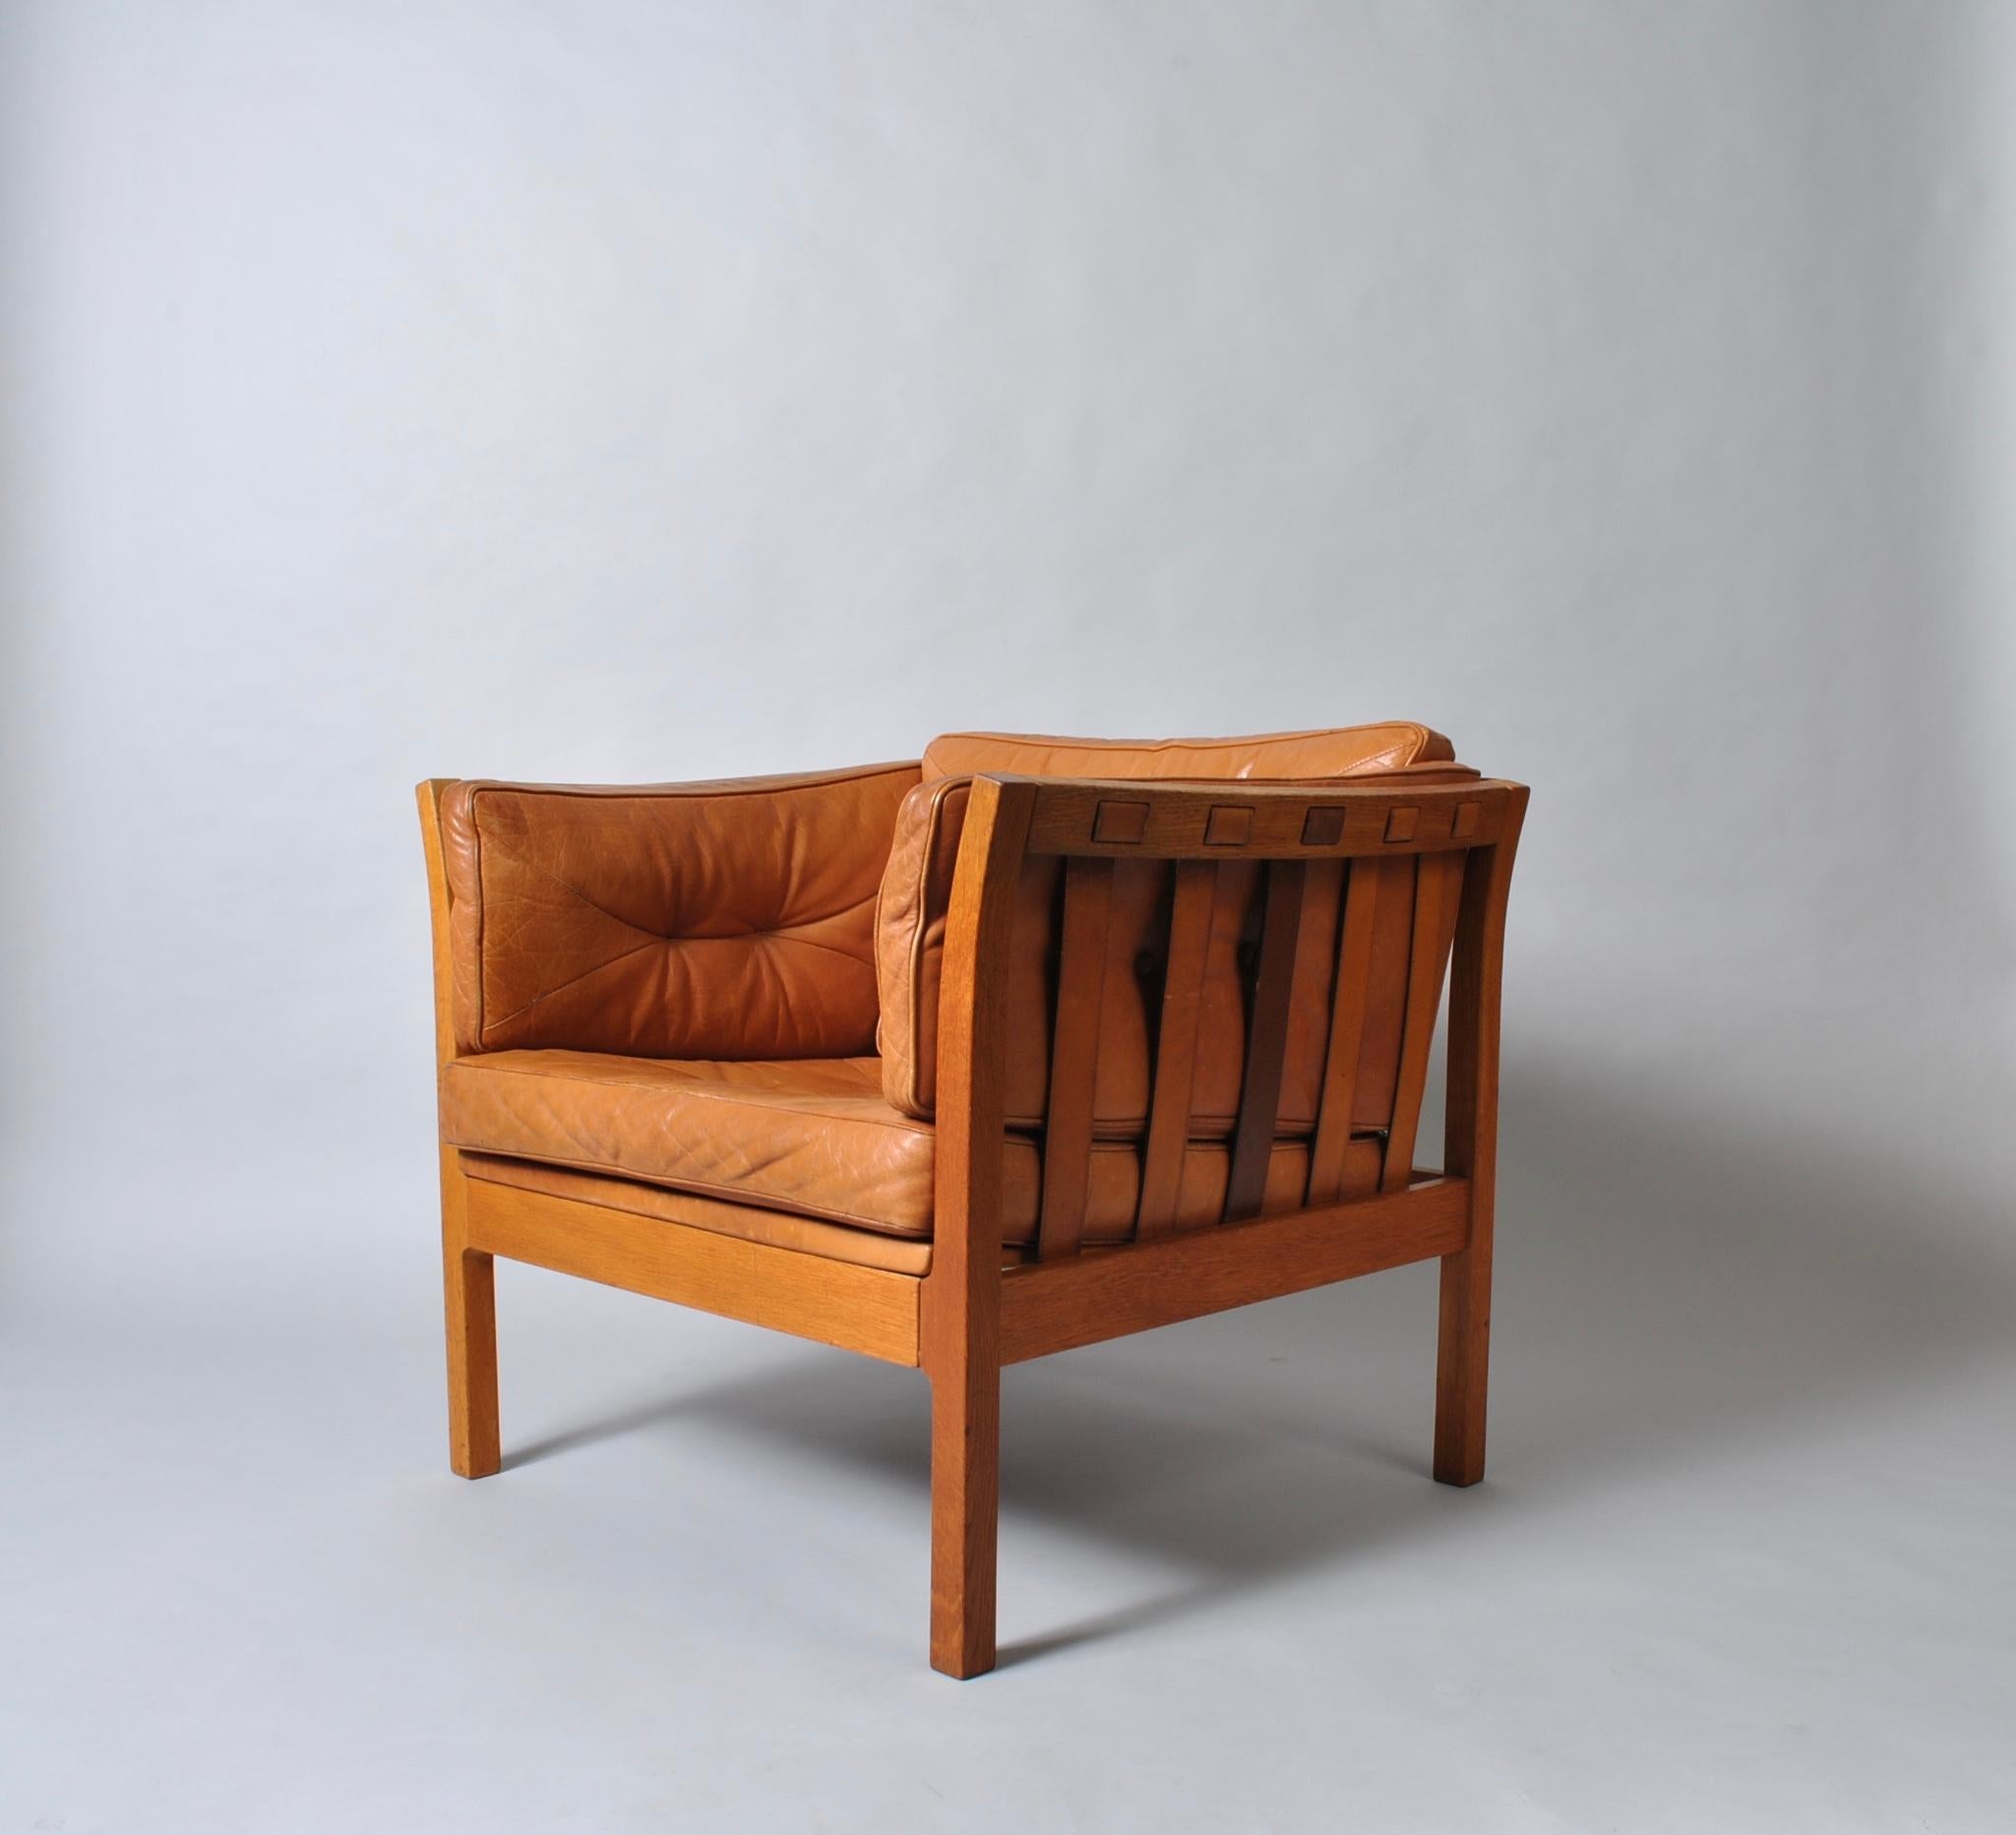 20th Century Danish Midcentury Club Lounge Chair, Tan Leather and Oak